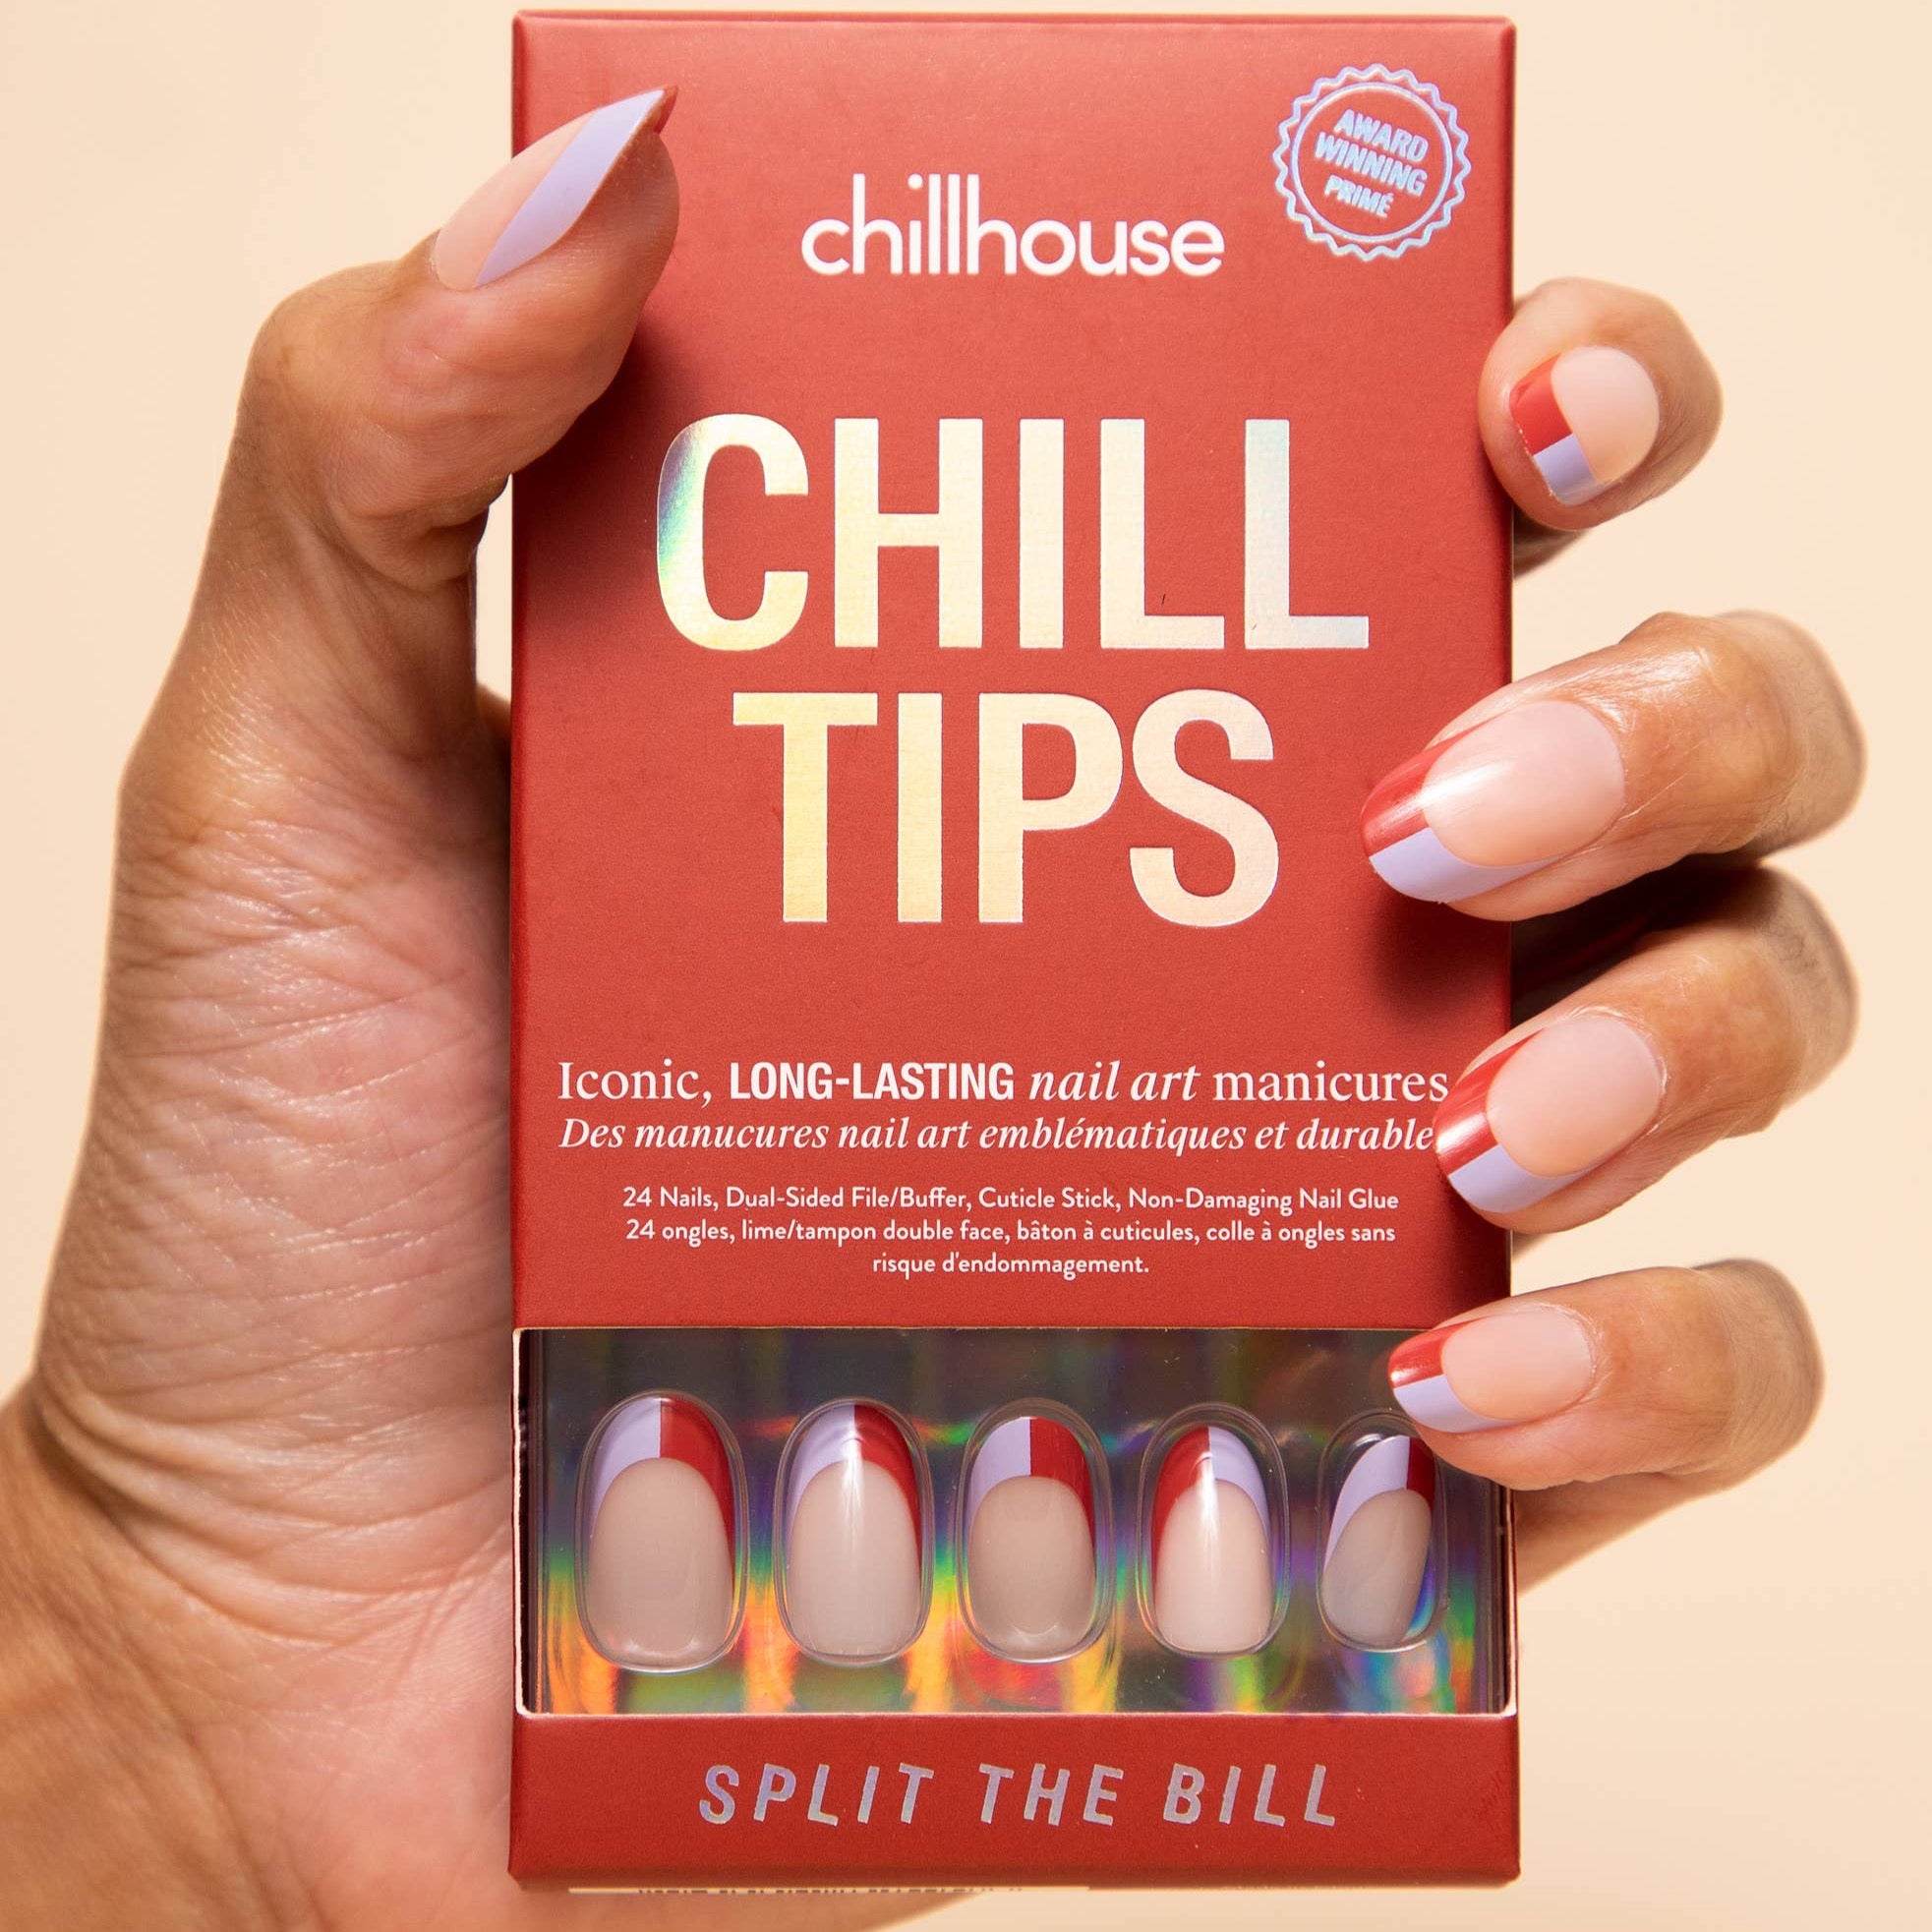 Chill Tips - Split the Bill by Chillhouse